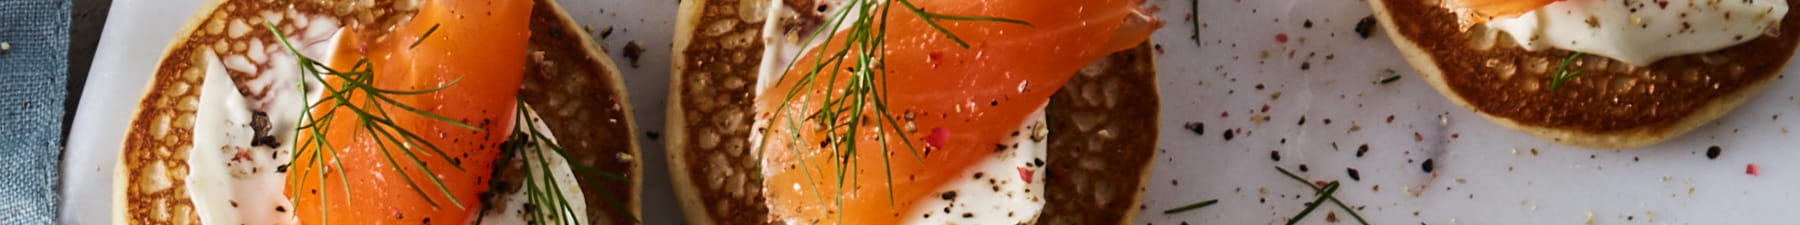 Smoked salmon on blinis with cream cheese